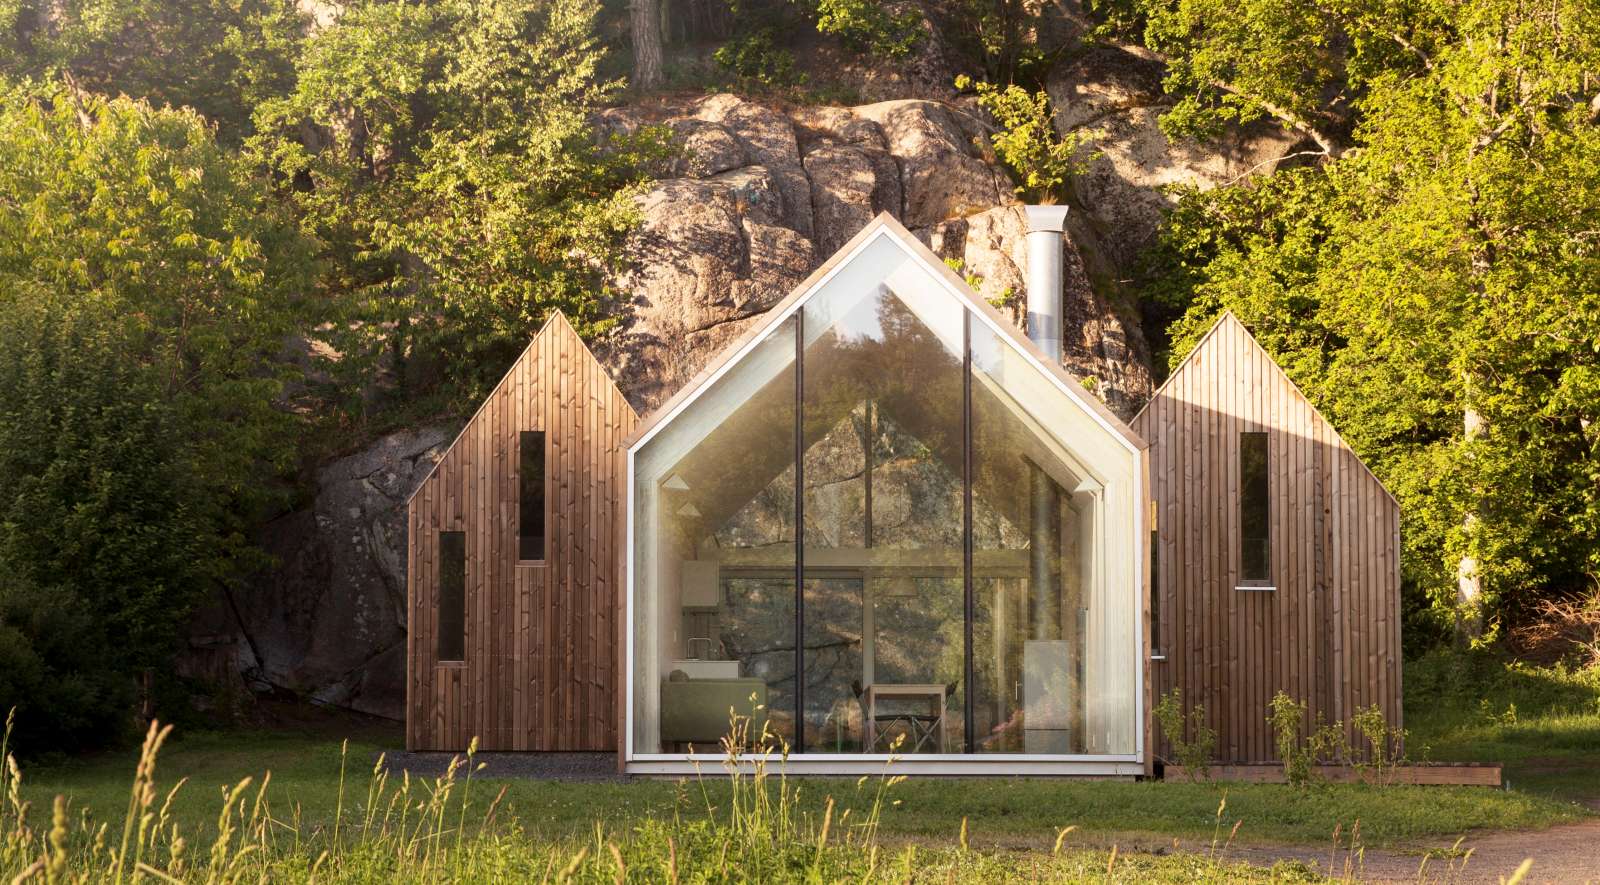 Micro Cluster Cabins